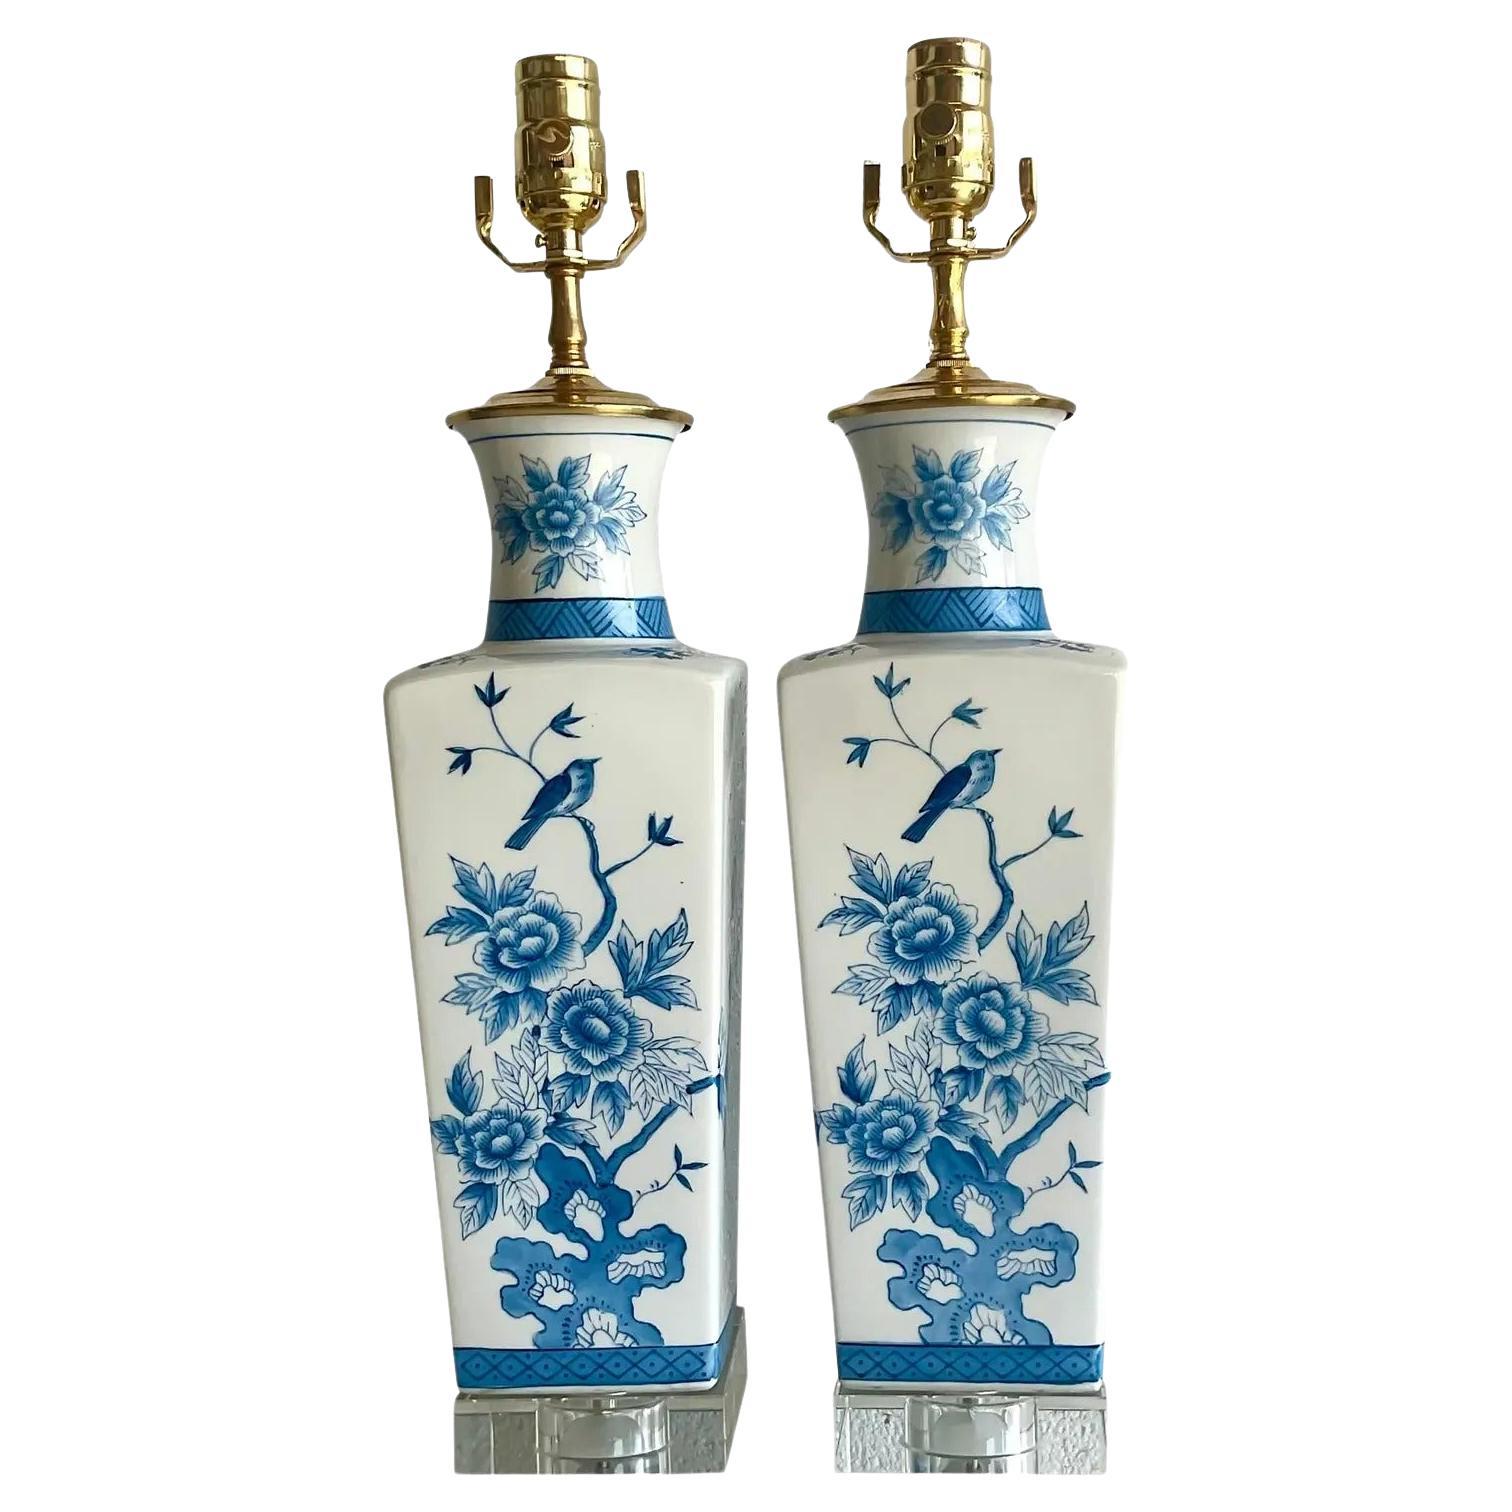 Vintage Regency Blue and White Chinoiserie Glazed Ceramic Lamps, a Pair